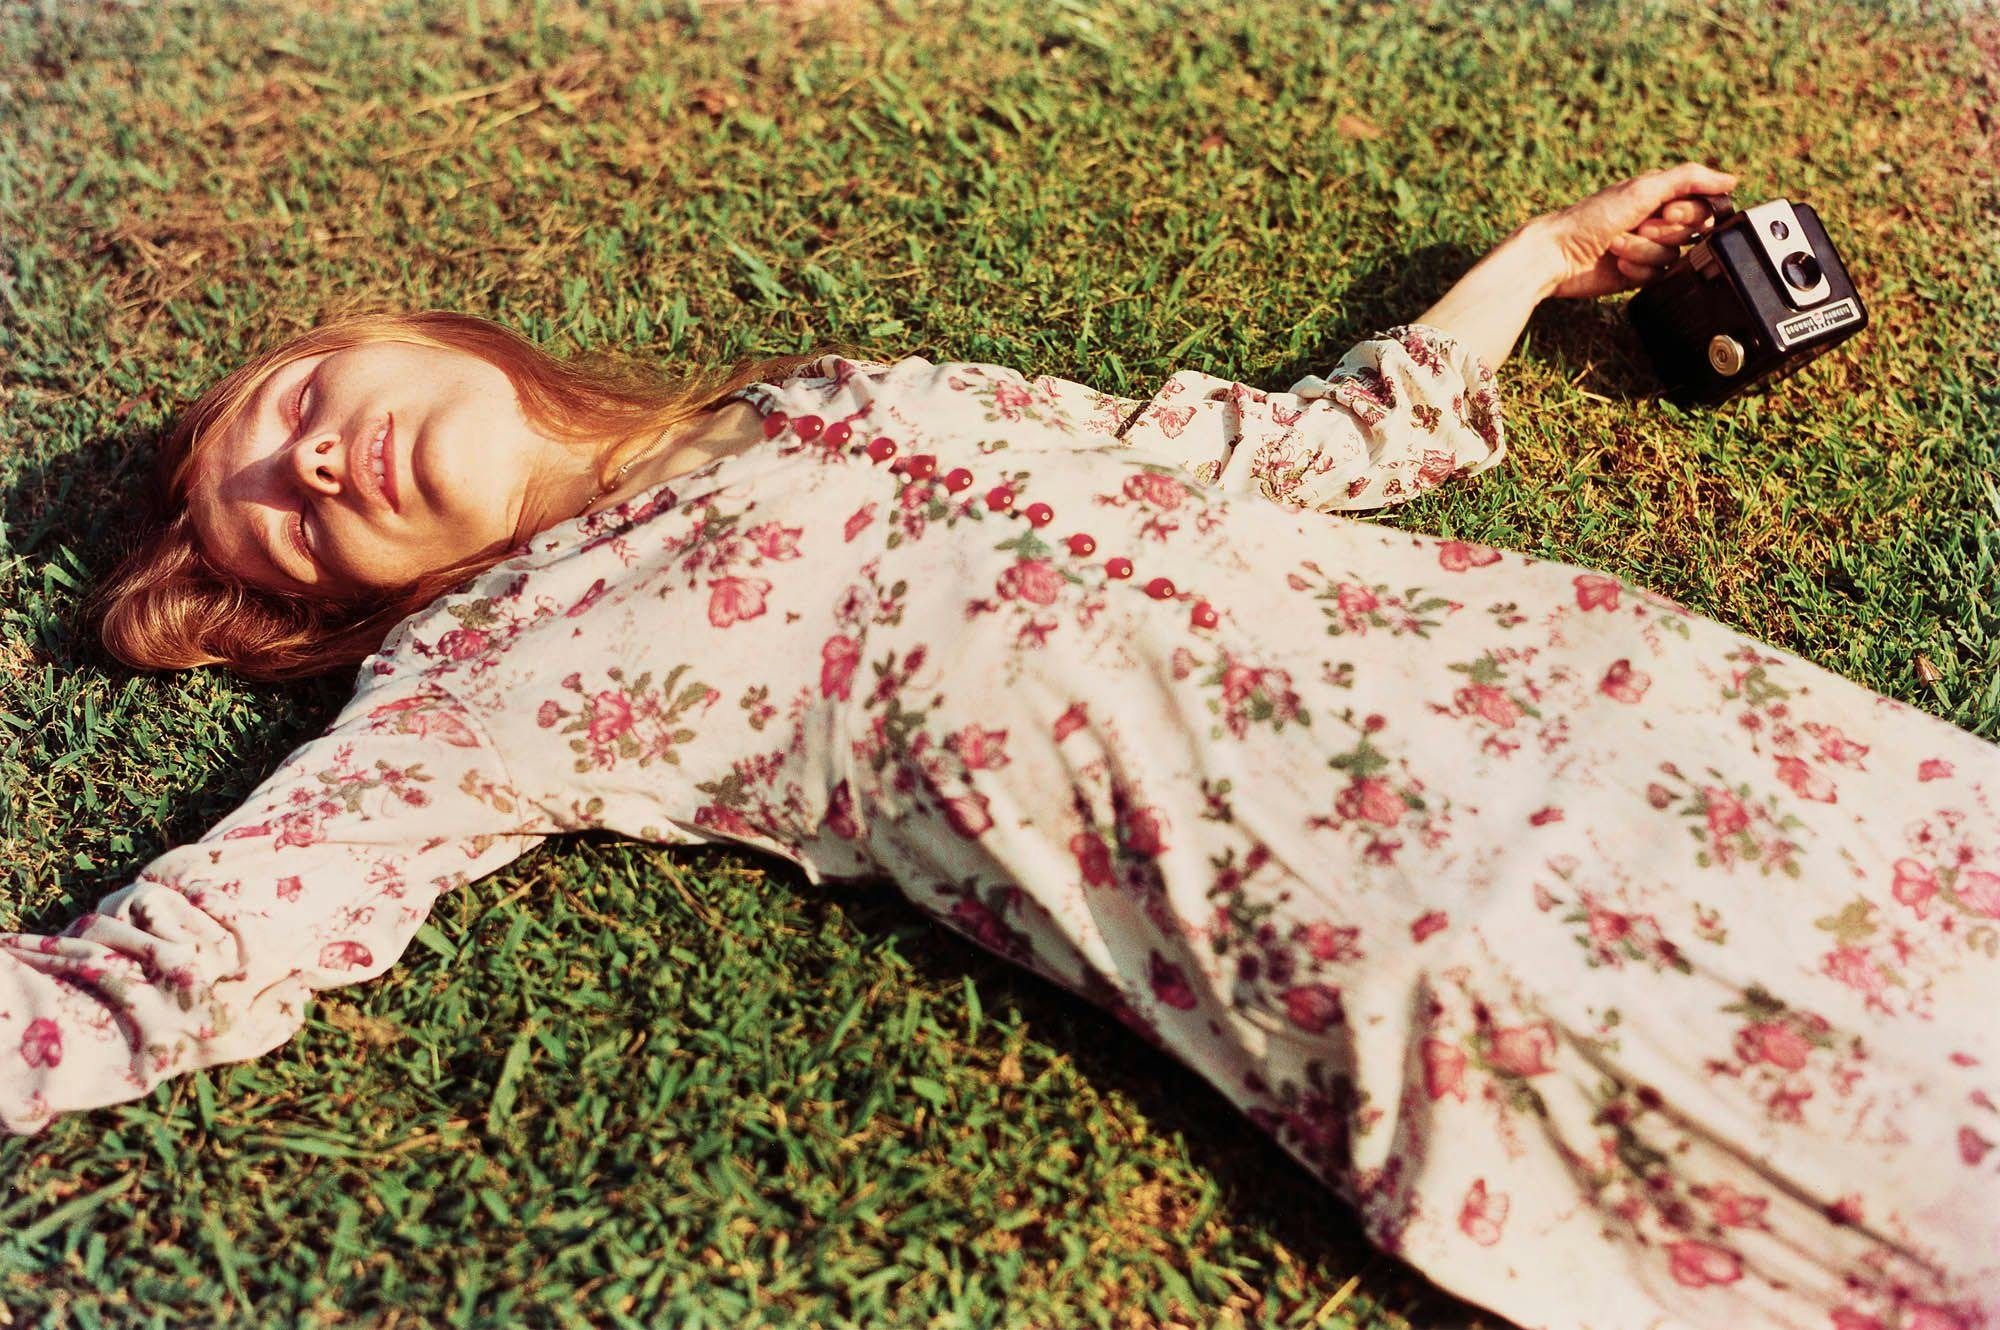 An untitled photograph by William Eggleston, dated 1975.